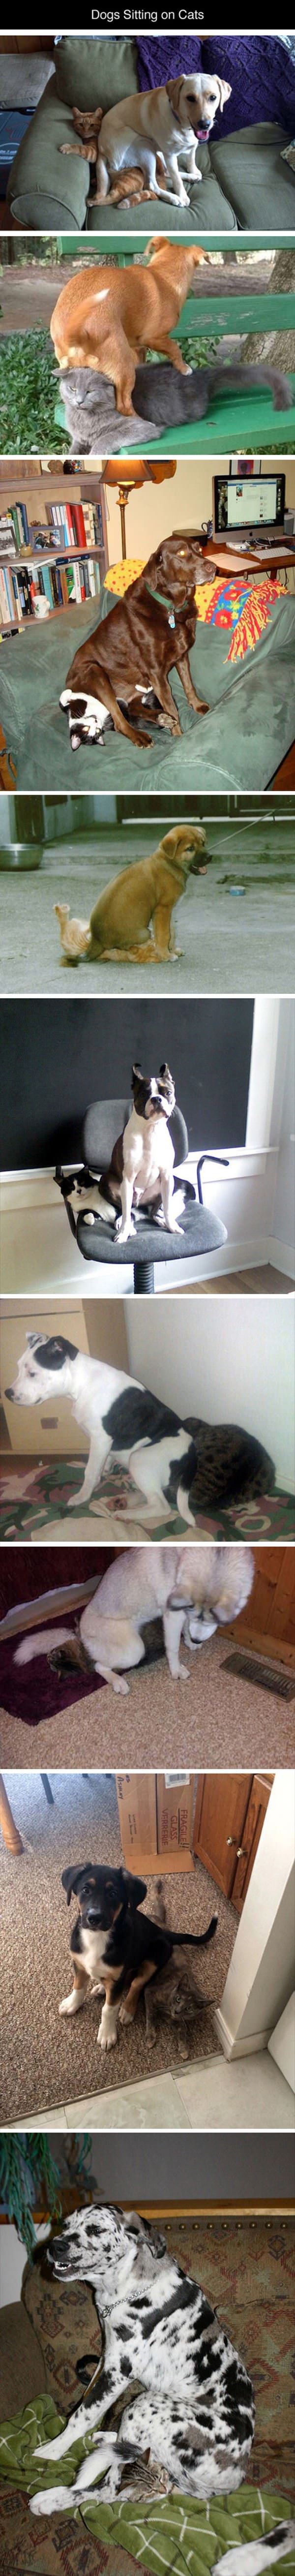 dogs sitting on cats funny picture